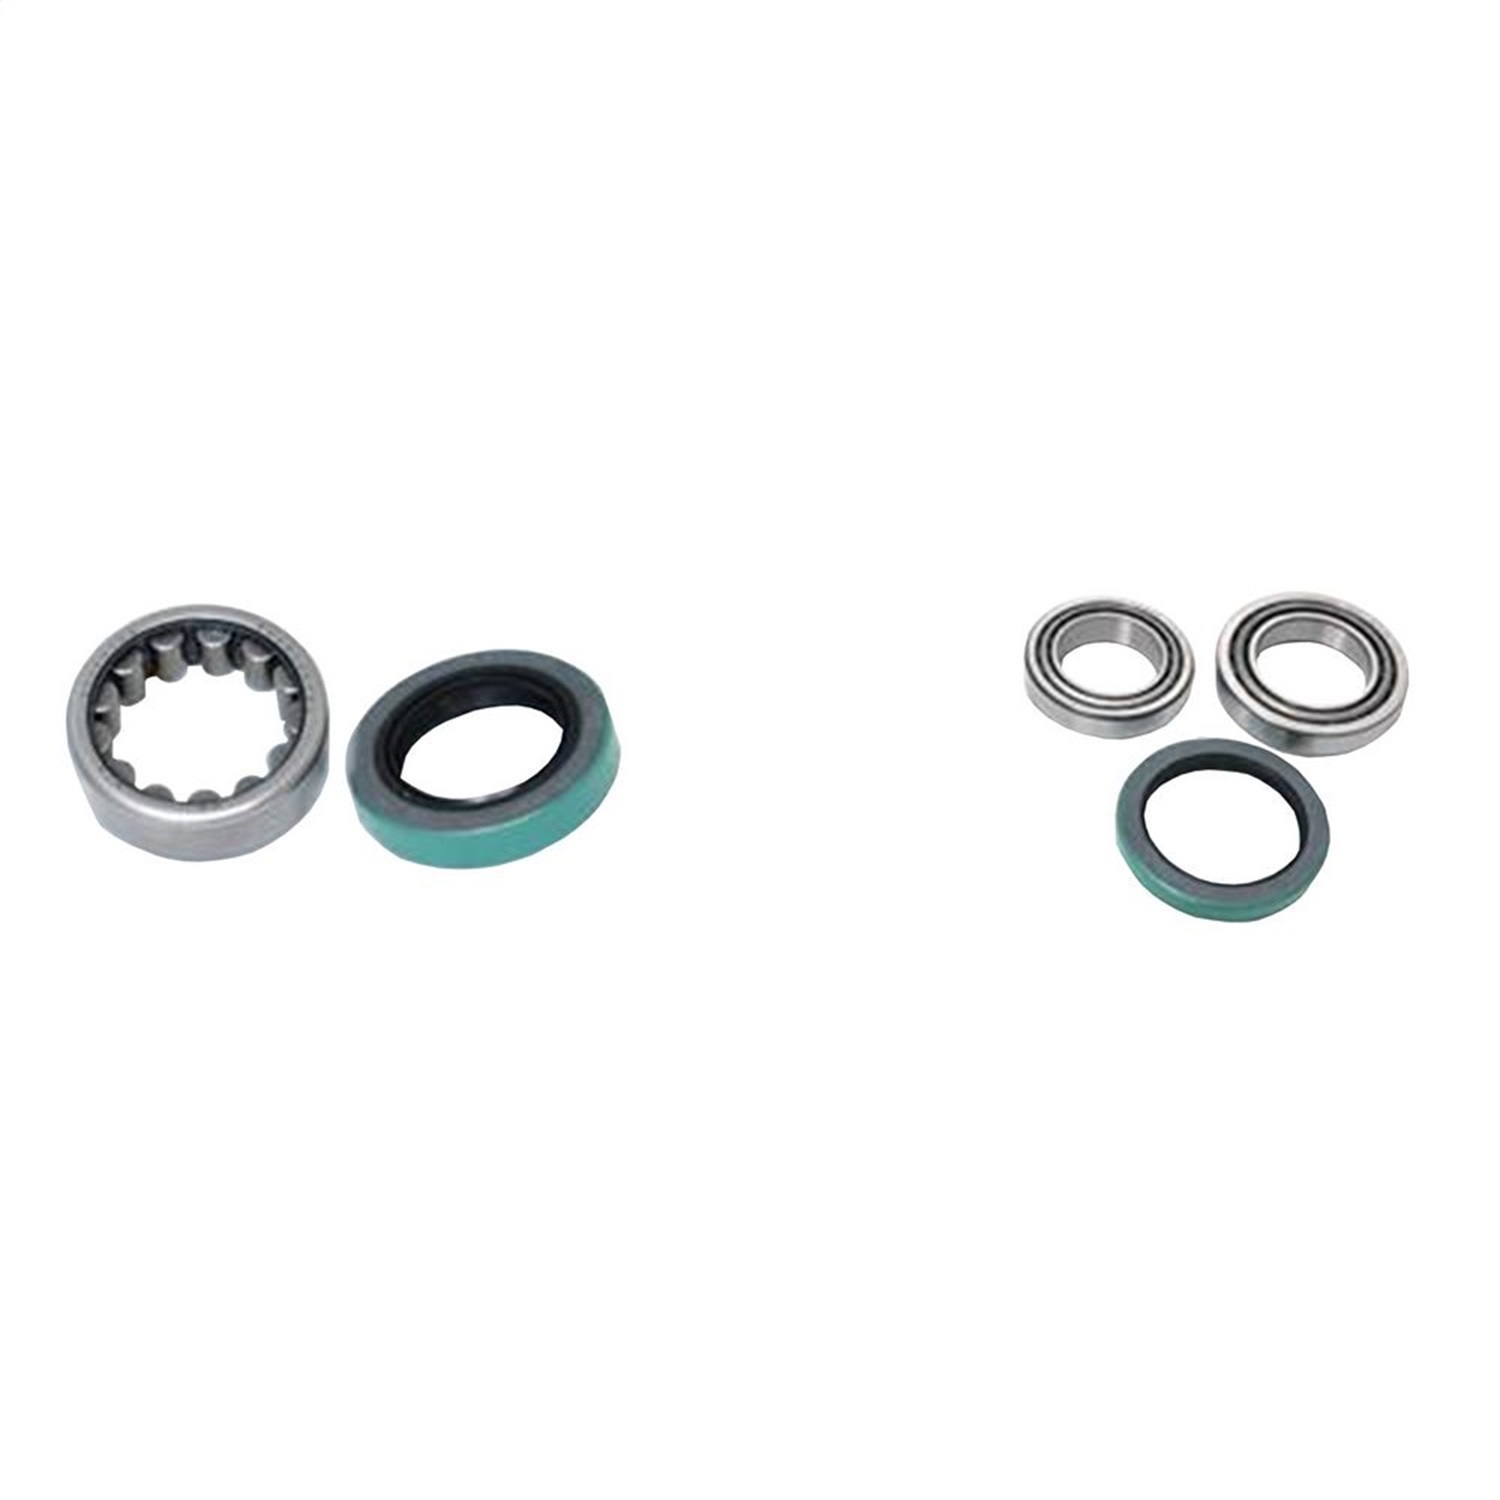 G2 Axle and Gear G2 Axle and Gear 30-9041A Wheel Bearing Kit Fits 79-00 Pickup Tacoma